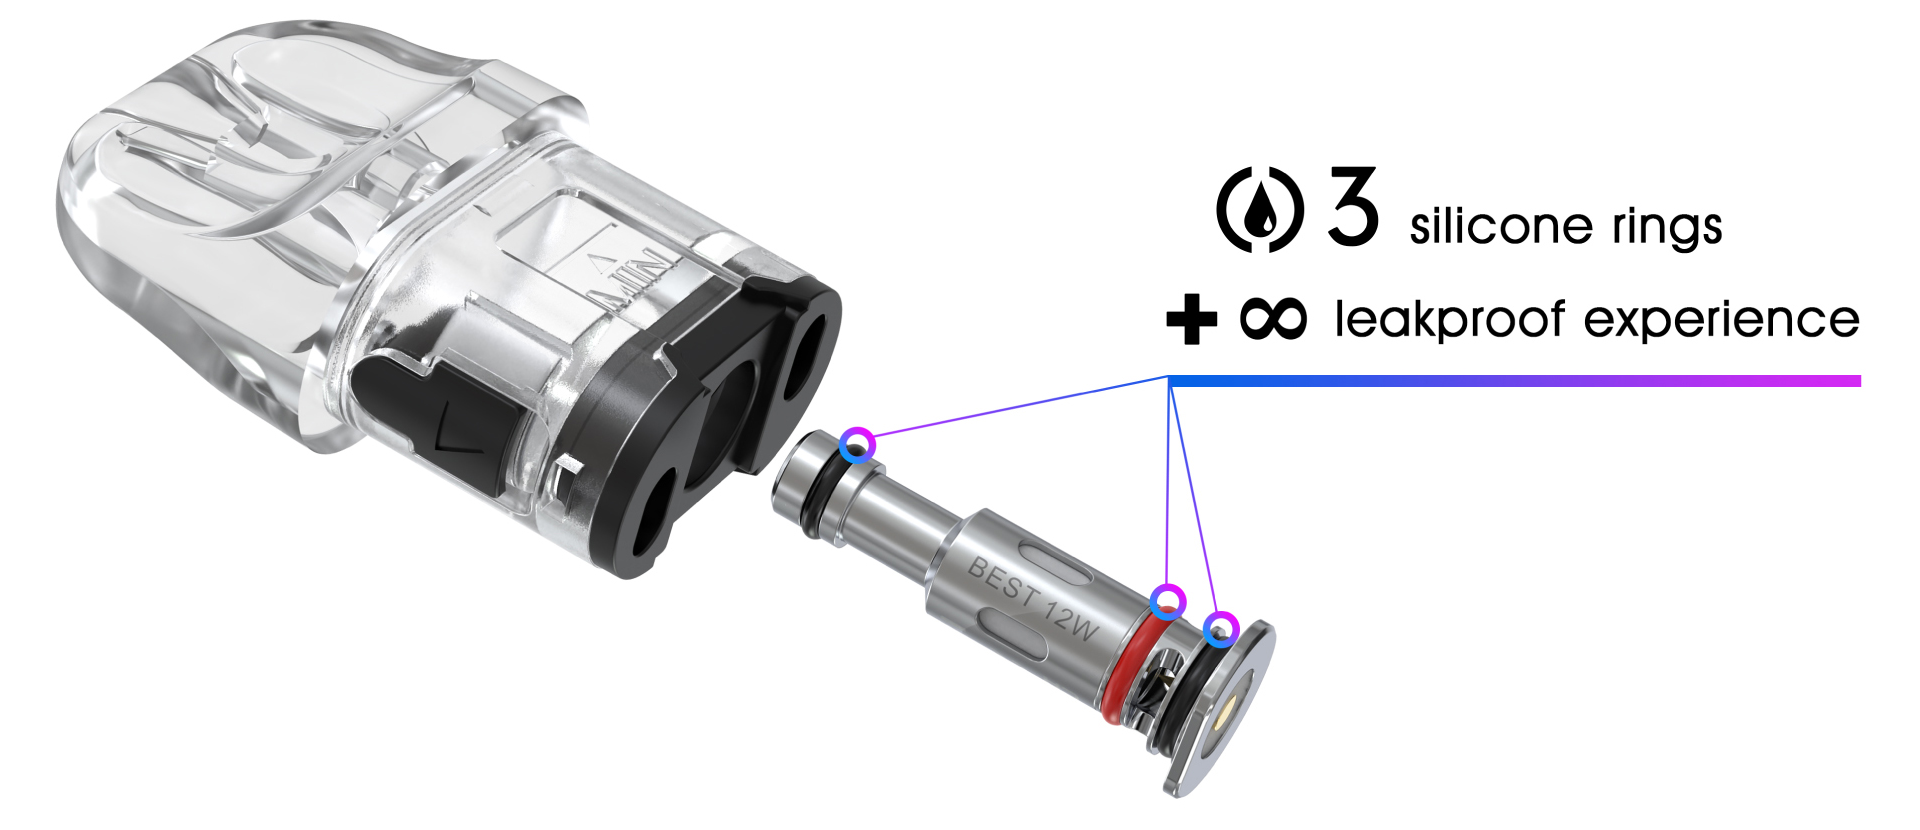 An illustration depicting a Novo 4 pod and a SMOK LP1 coil.